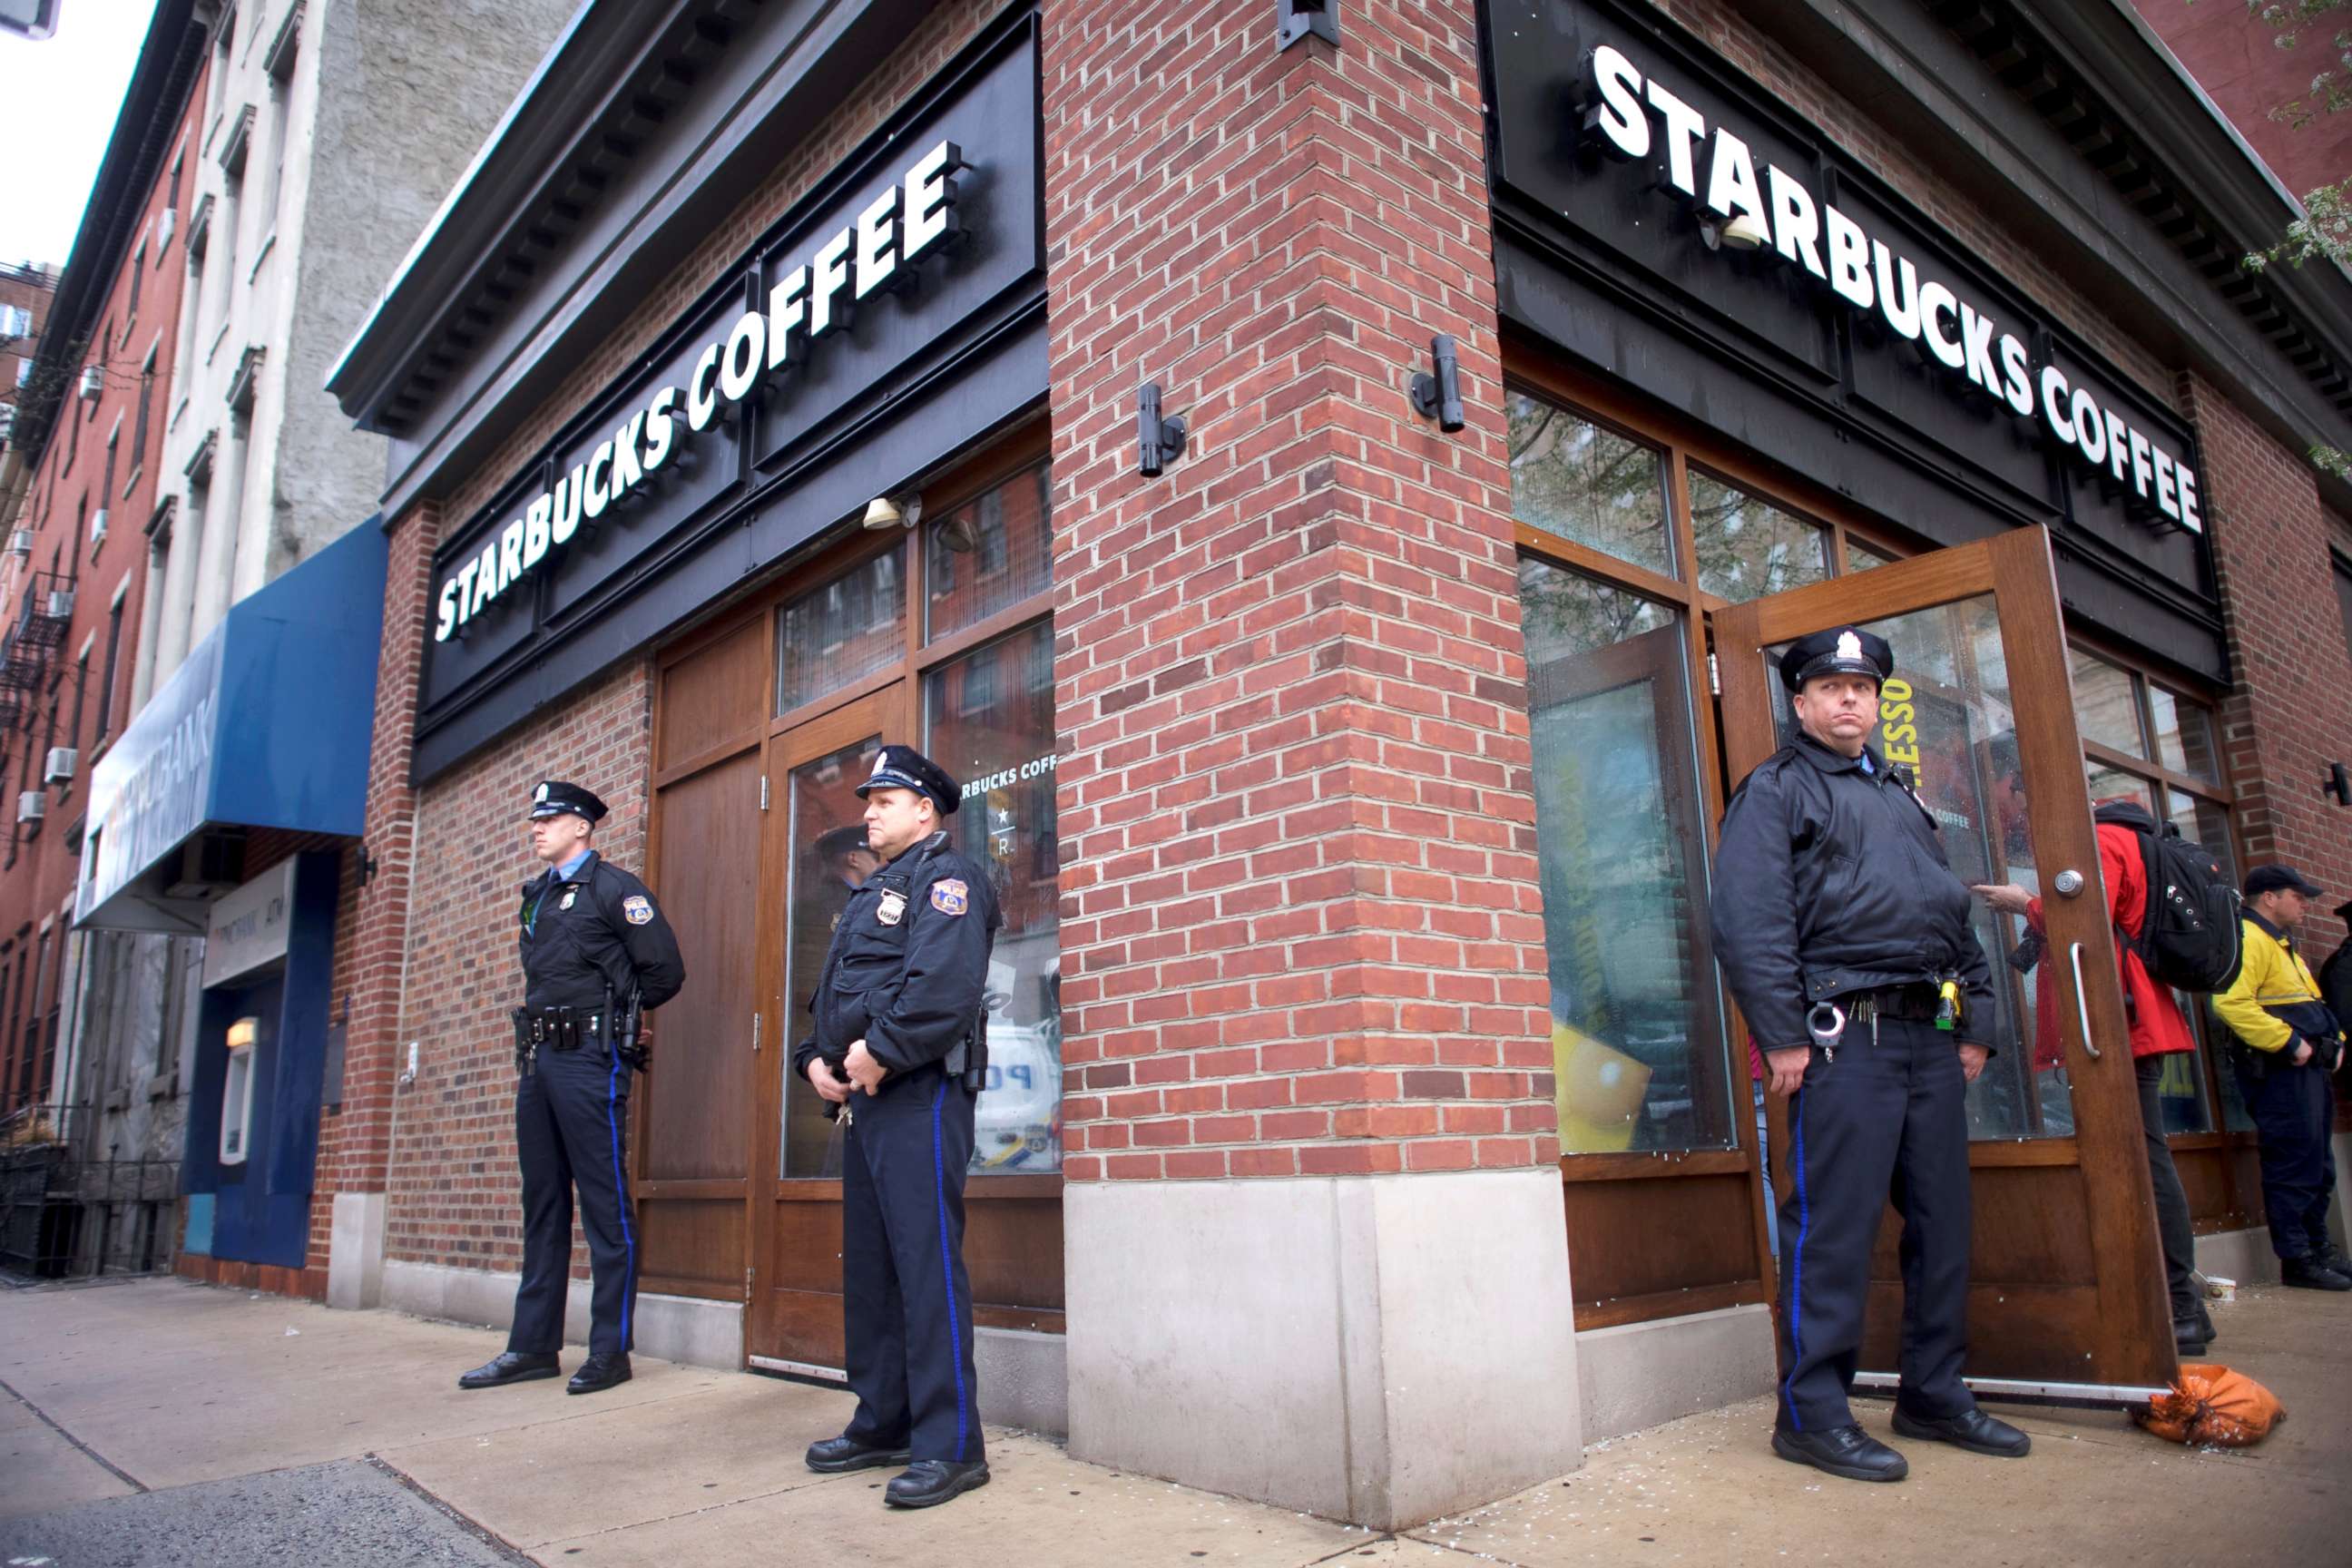 PHOTO: Police officers monitor activity outside as protesters demonstrate inside a Center City Starbucks, where two black men were arrested, in Philadelphia, April 16, 2018.